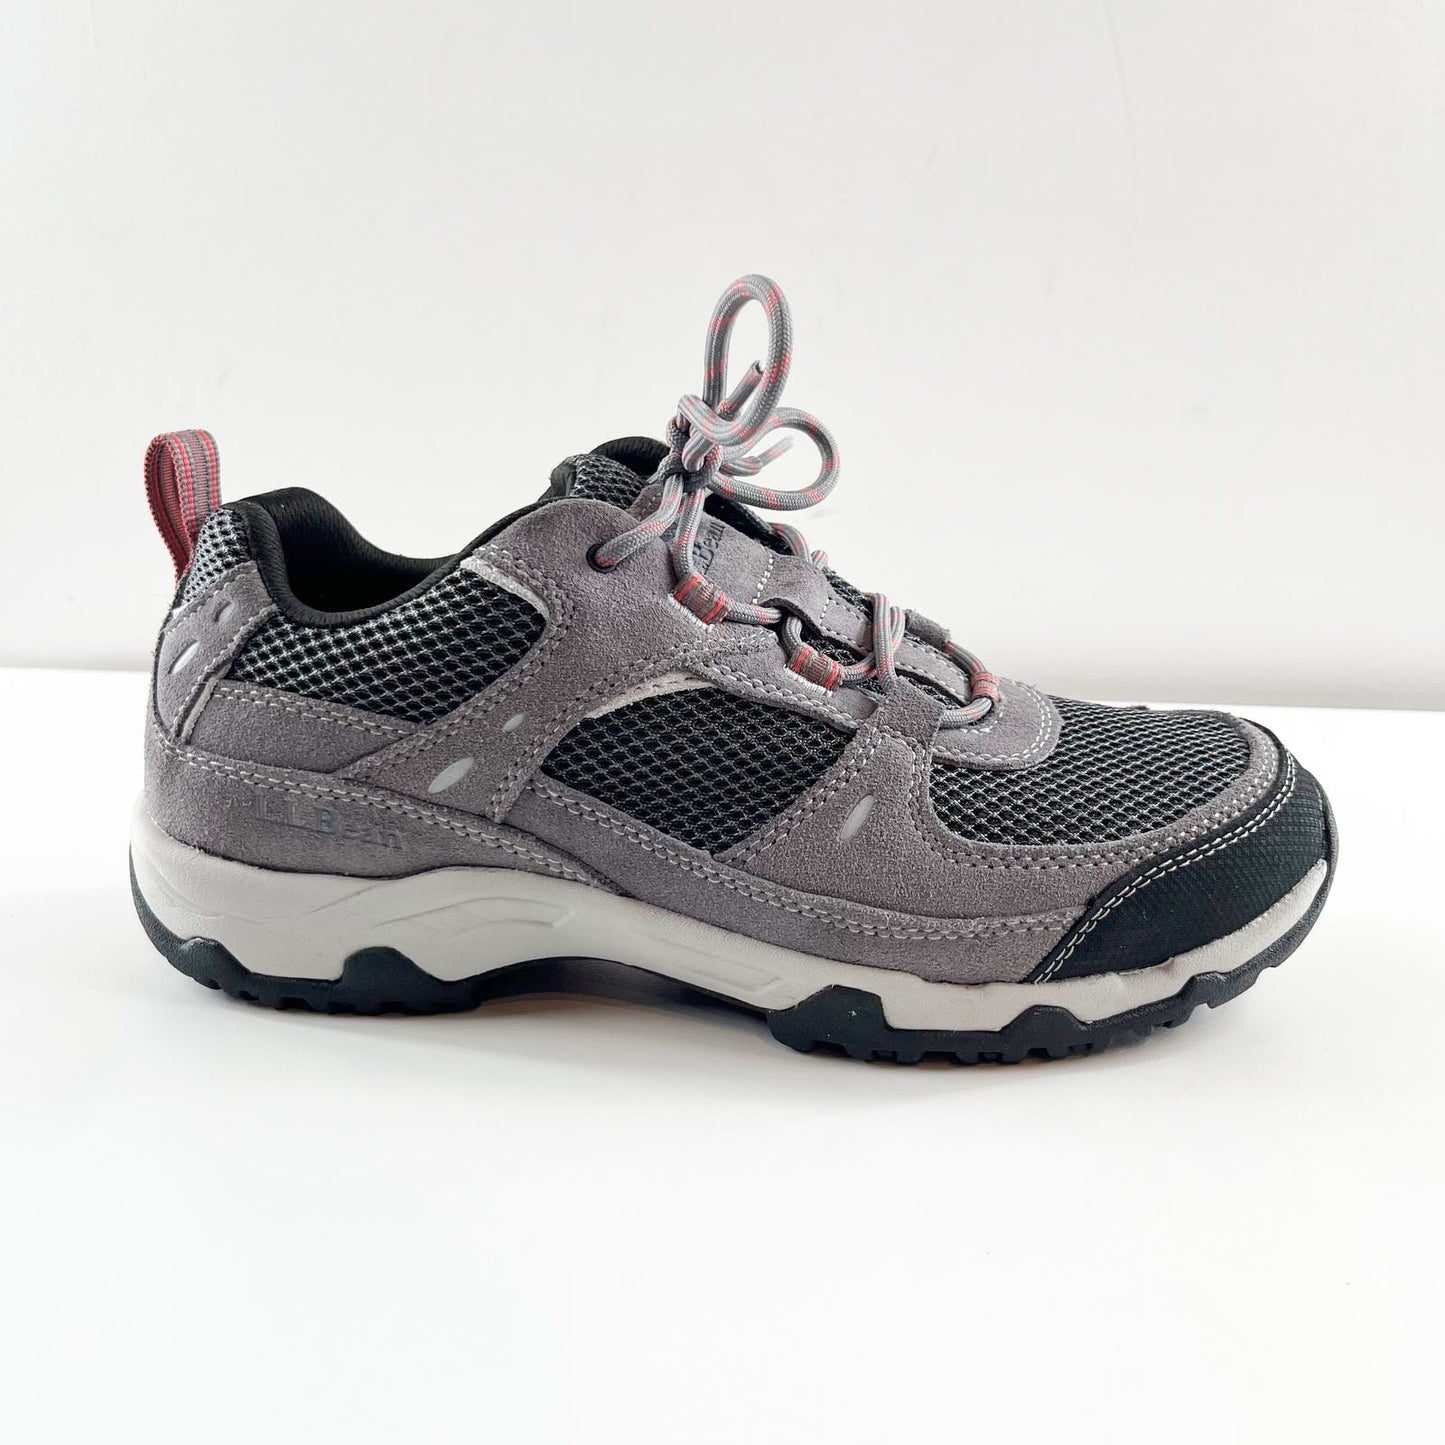 L.L. Bean Trail Model 4 Ventilated Hiking Shoes Sneakers Frost Gray 9.5 Wide